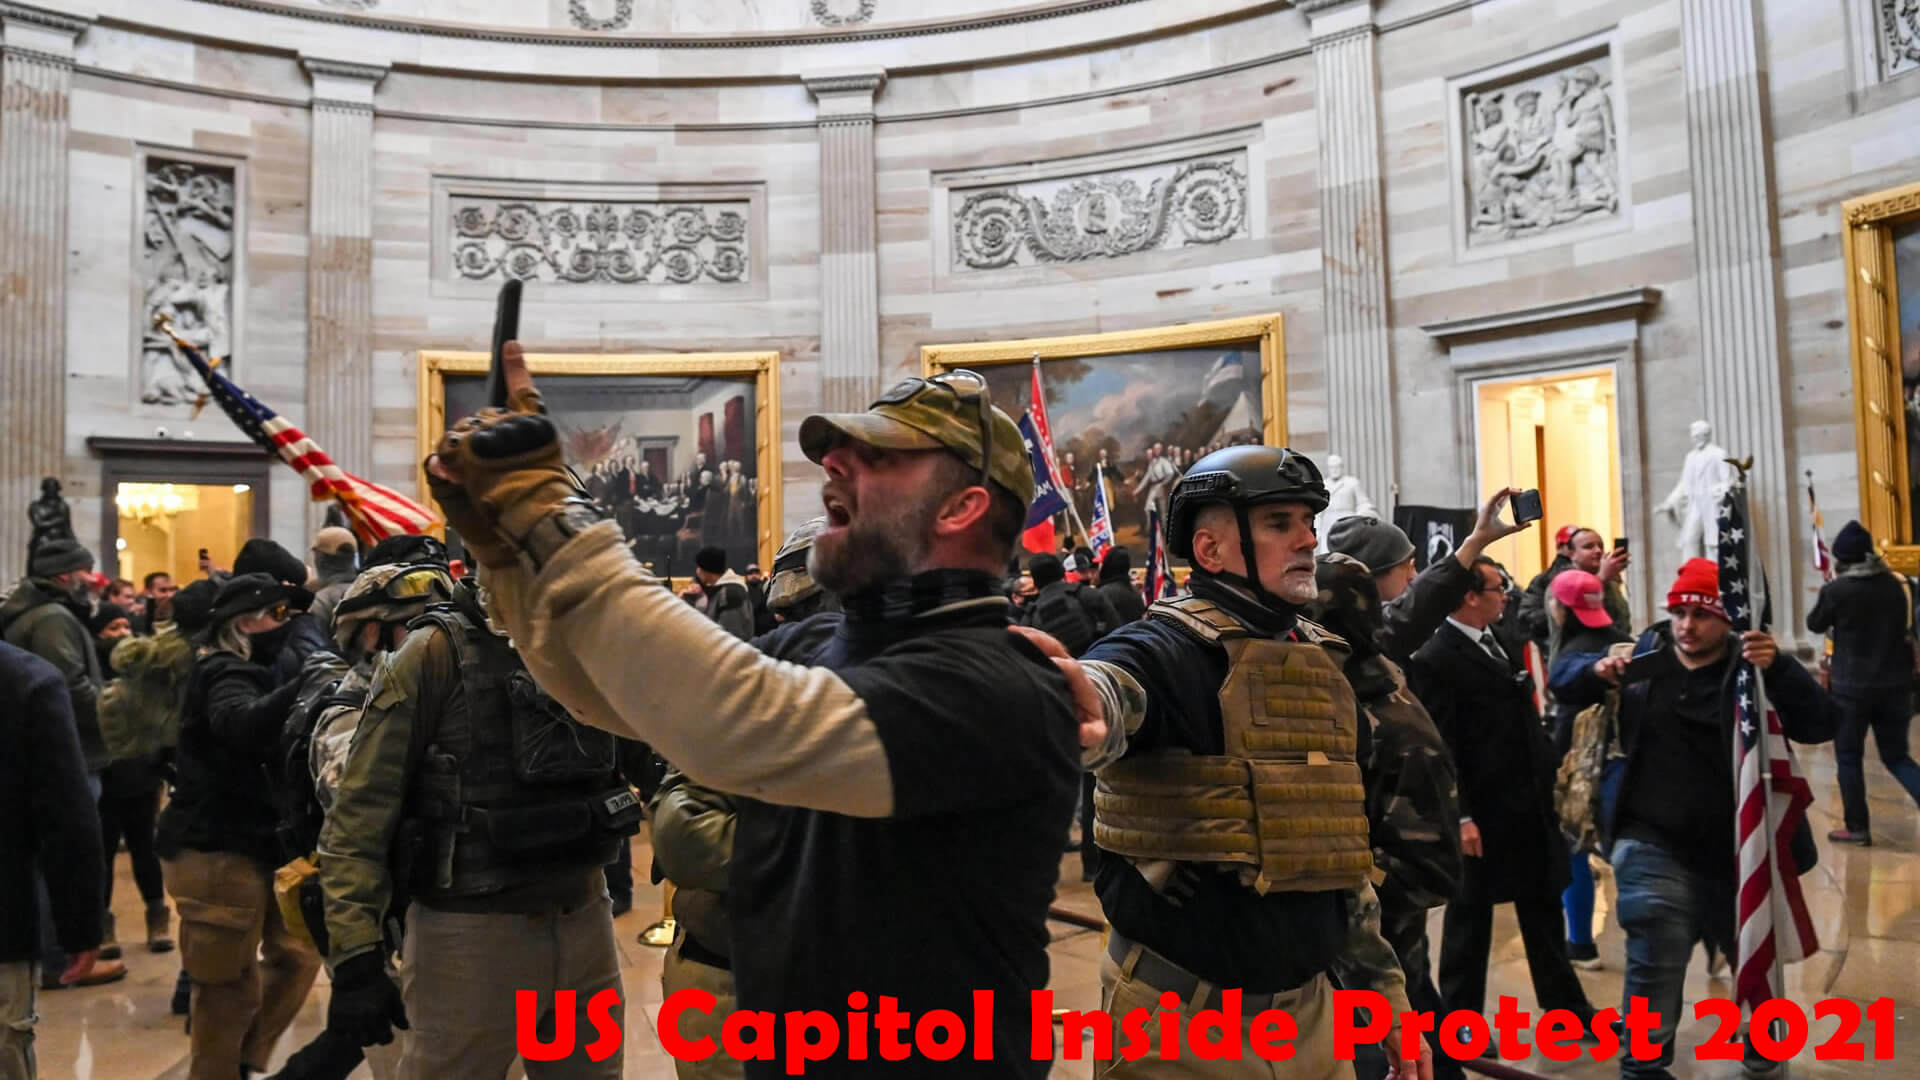 US Capitol Inside Protest 2021